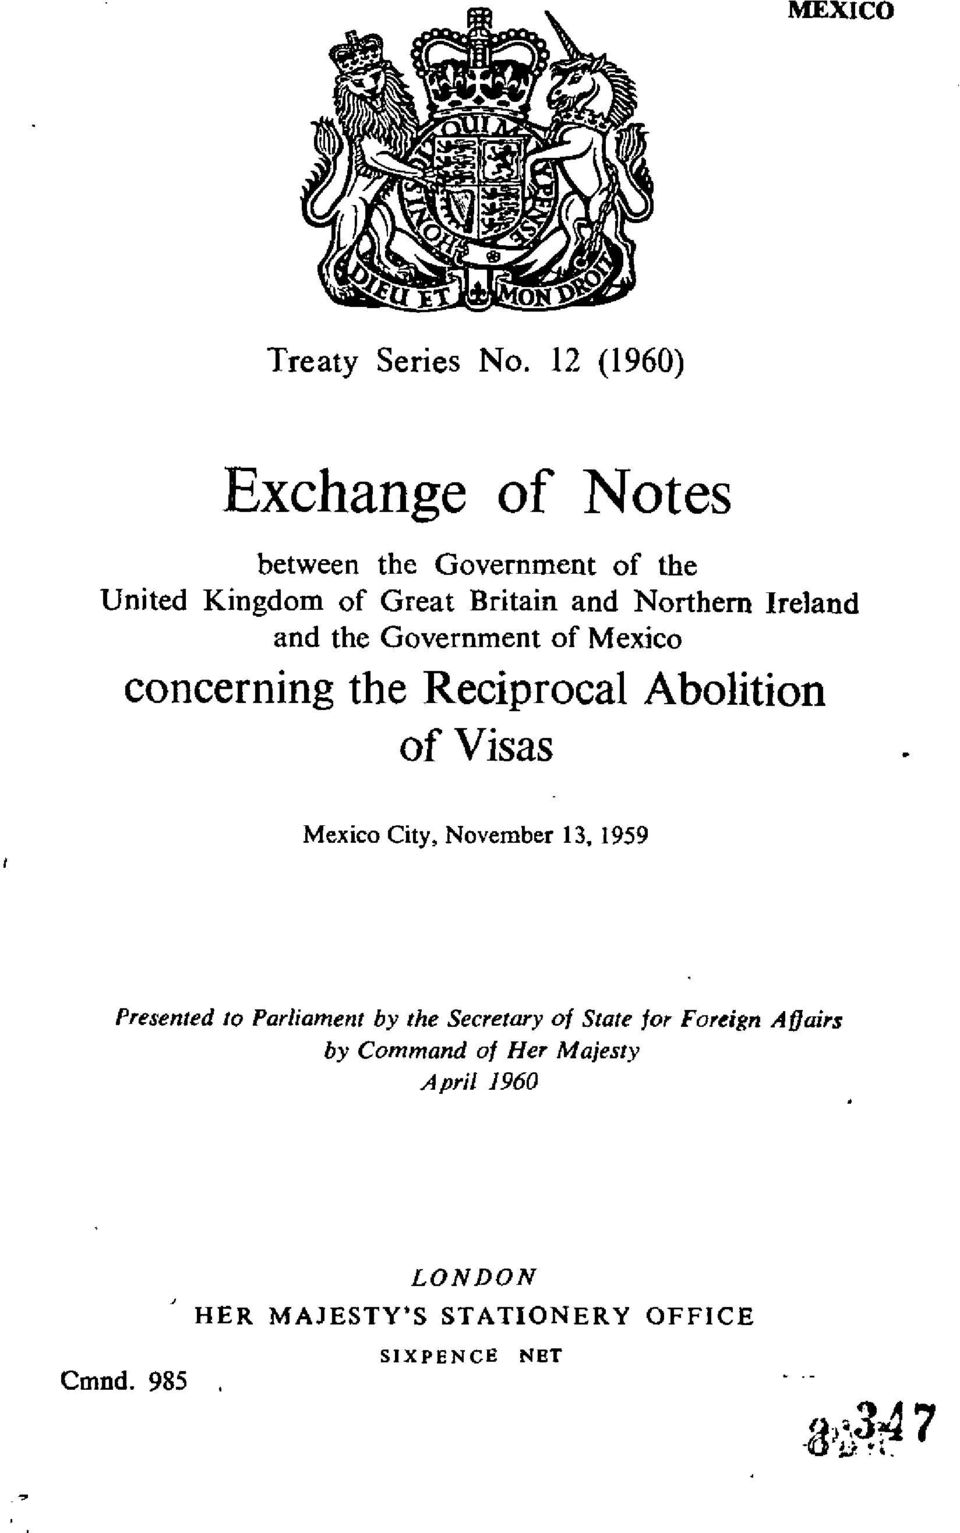 Ireland and the Government of Mexico concerning the Reciprocal Abolition of Visas Mexico City, November